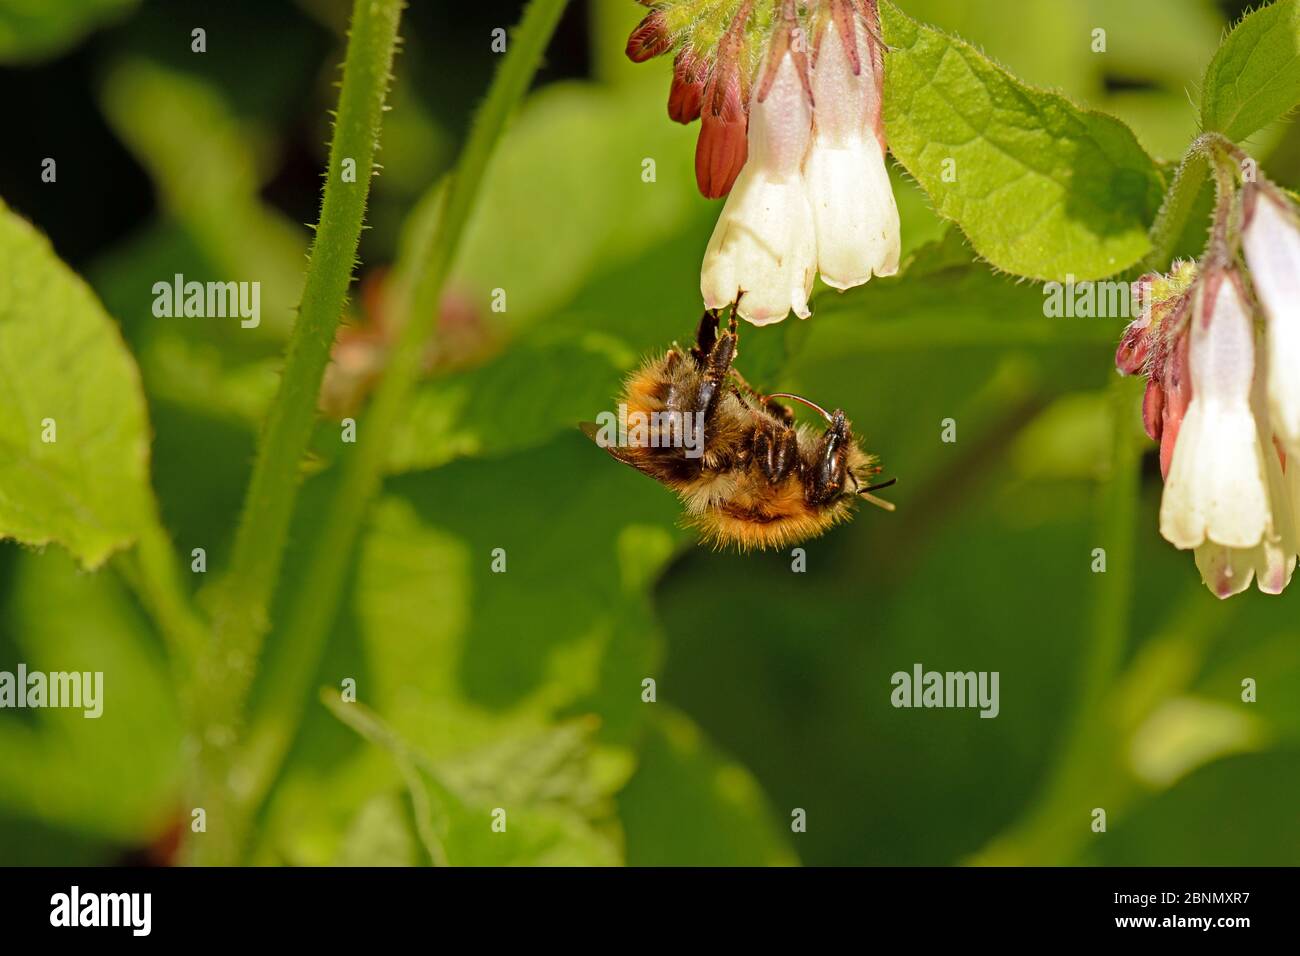 Common carder bee (Bombus pascuorum) pollinating Creeping comfrey (Symphytum grandiflorum) in garden, Herefordshire, England, UK, May. Stock Photo